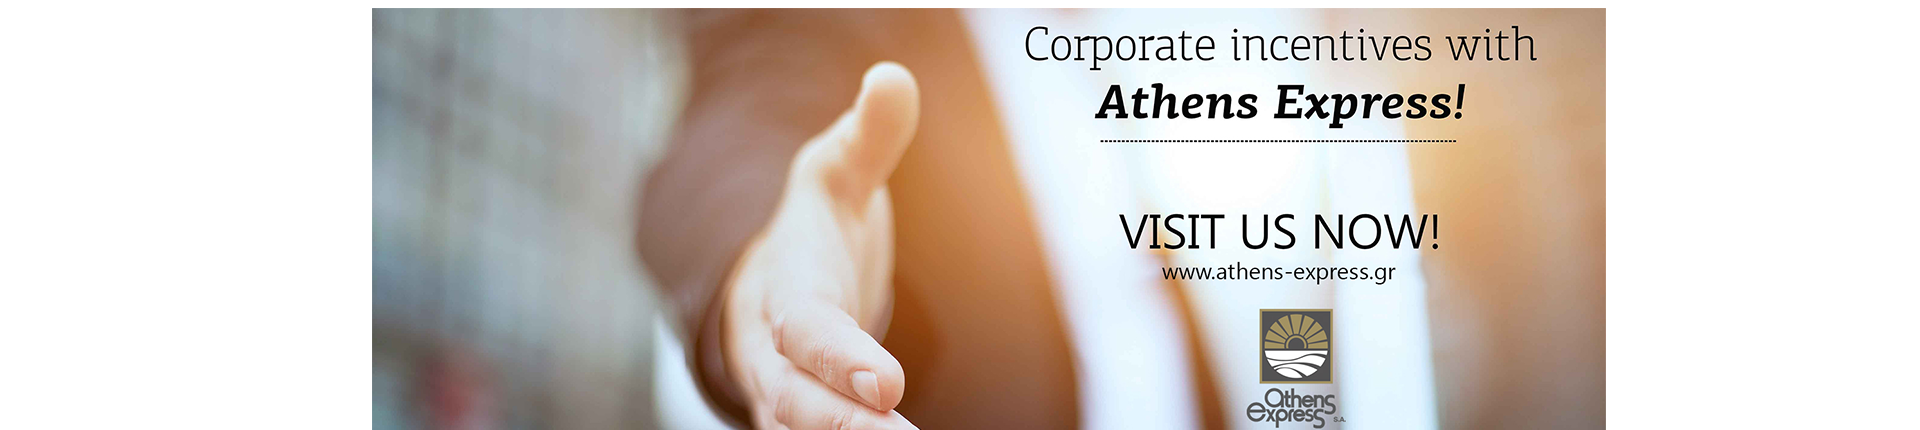 Corporate Incentives 1 1920x430 1